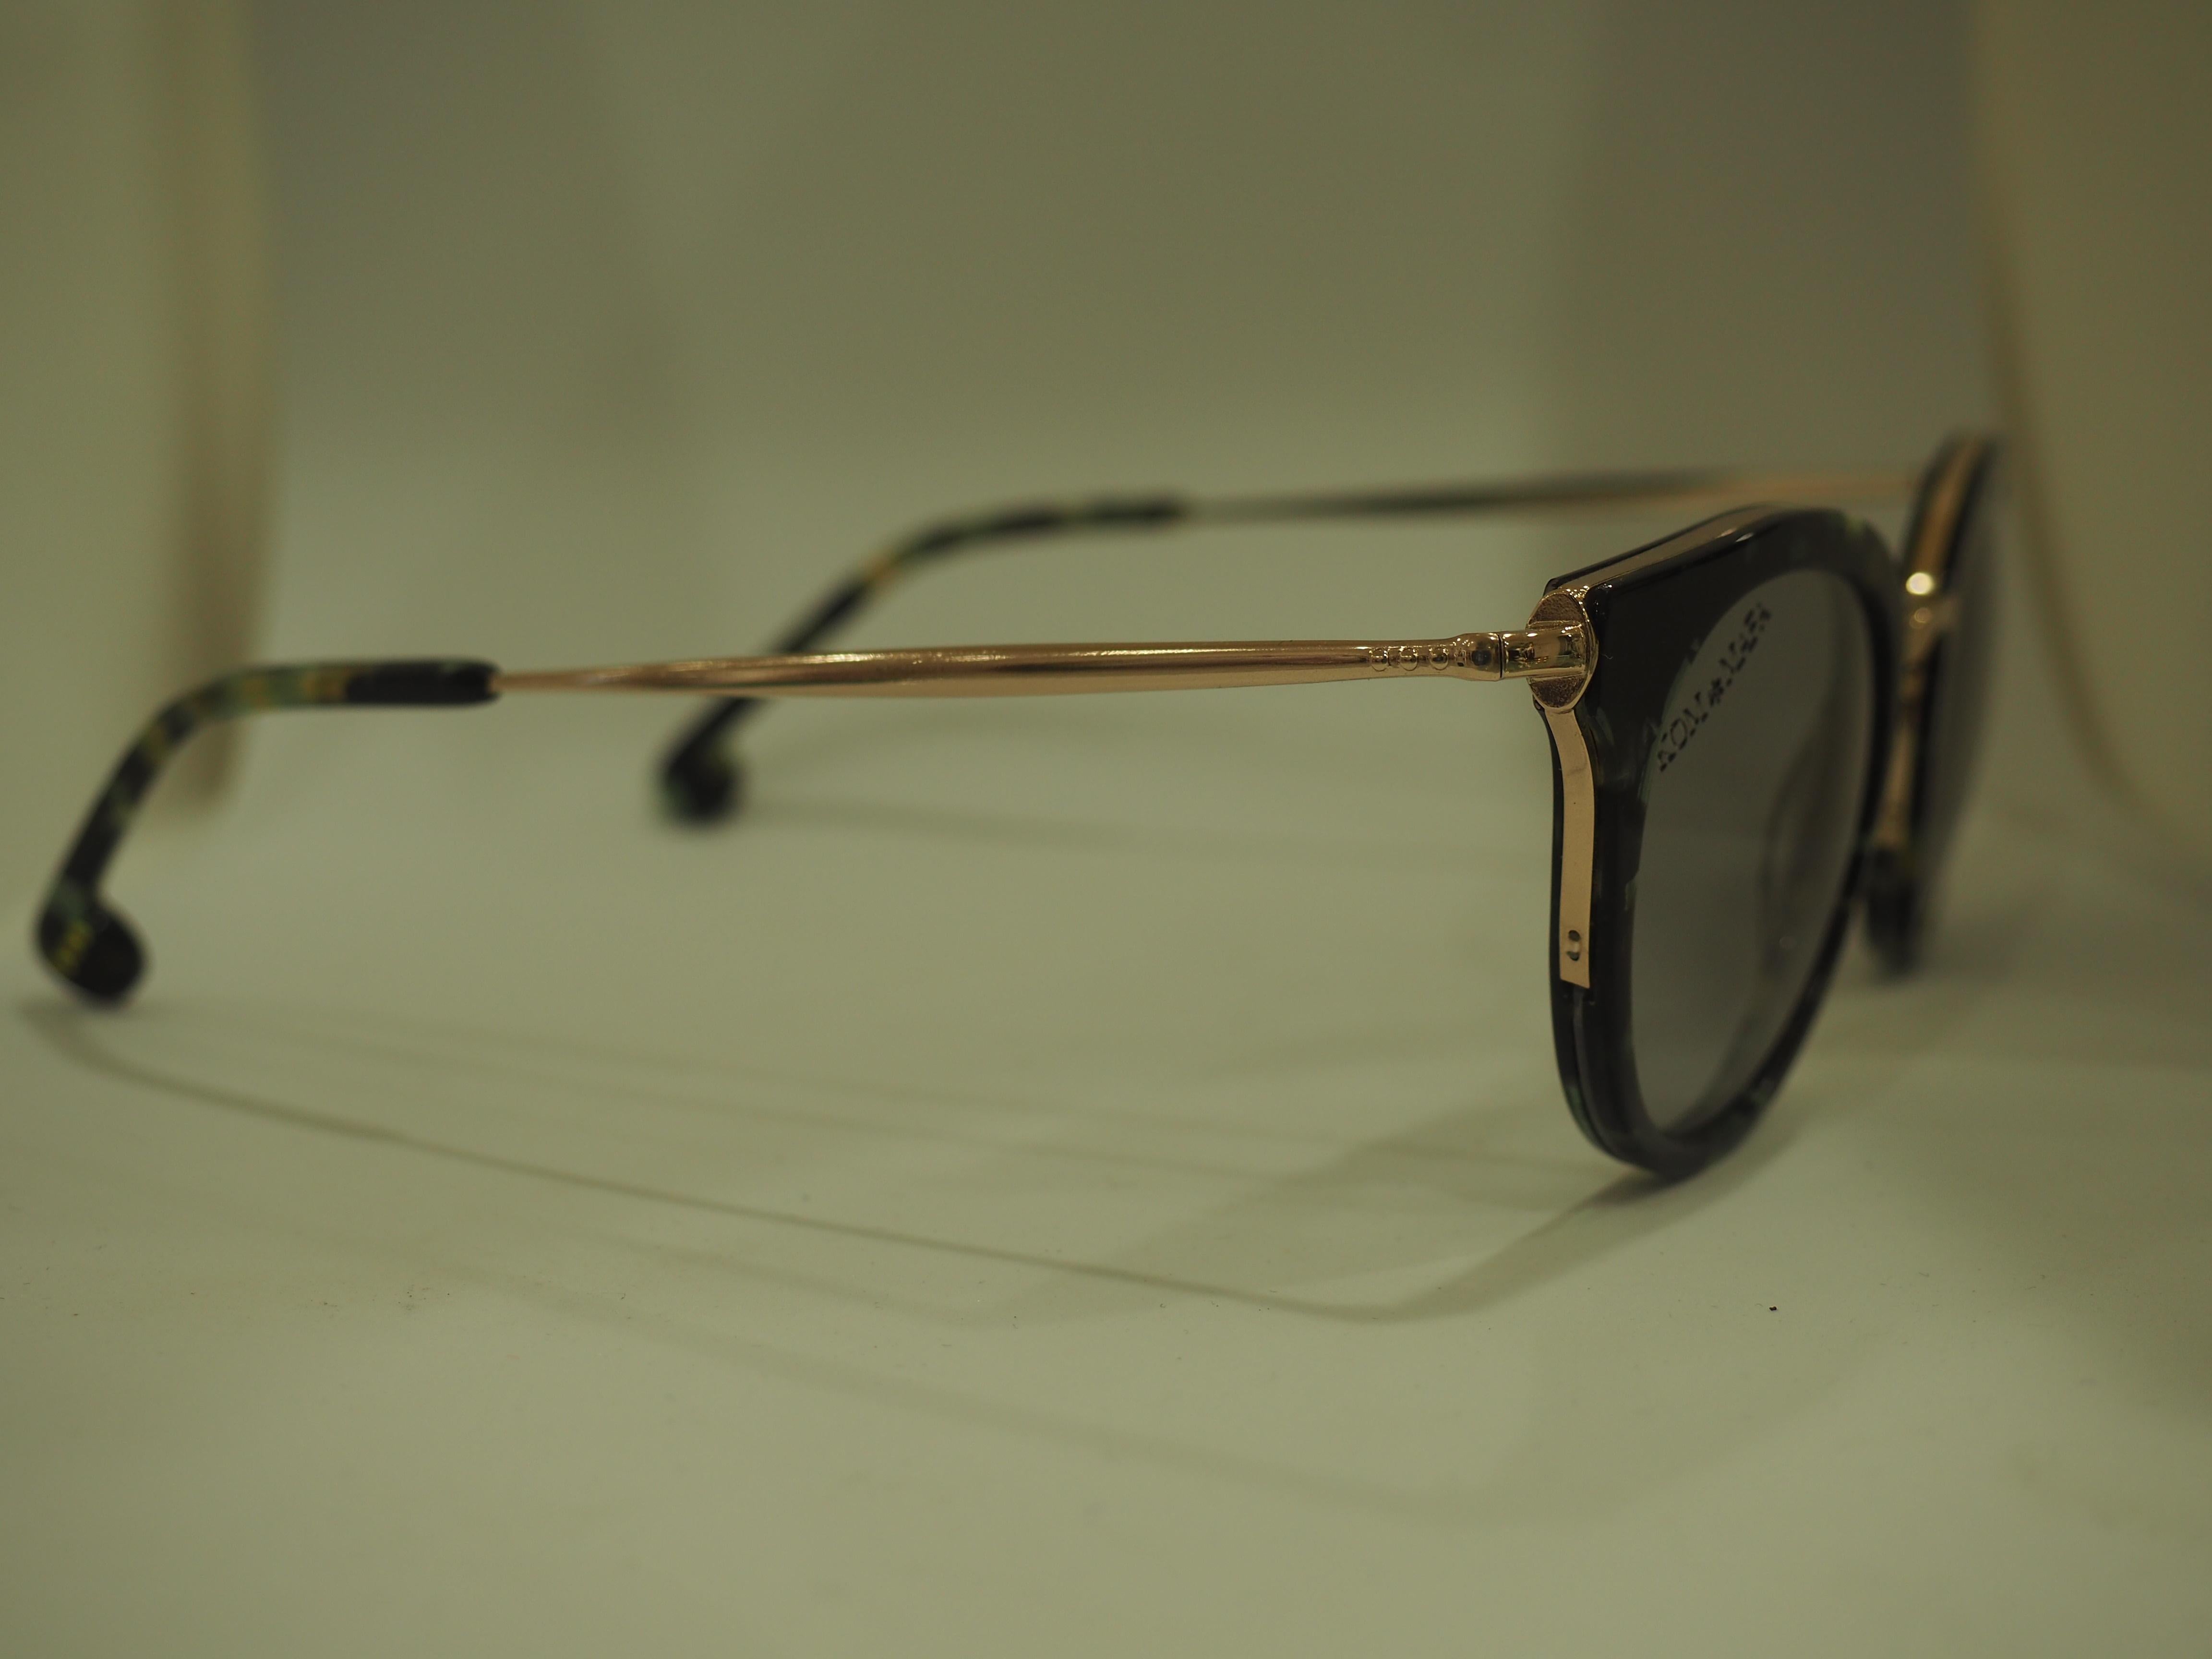 Kommafa tortoise sunglasses
totally made in italy
one of a kind